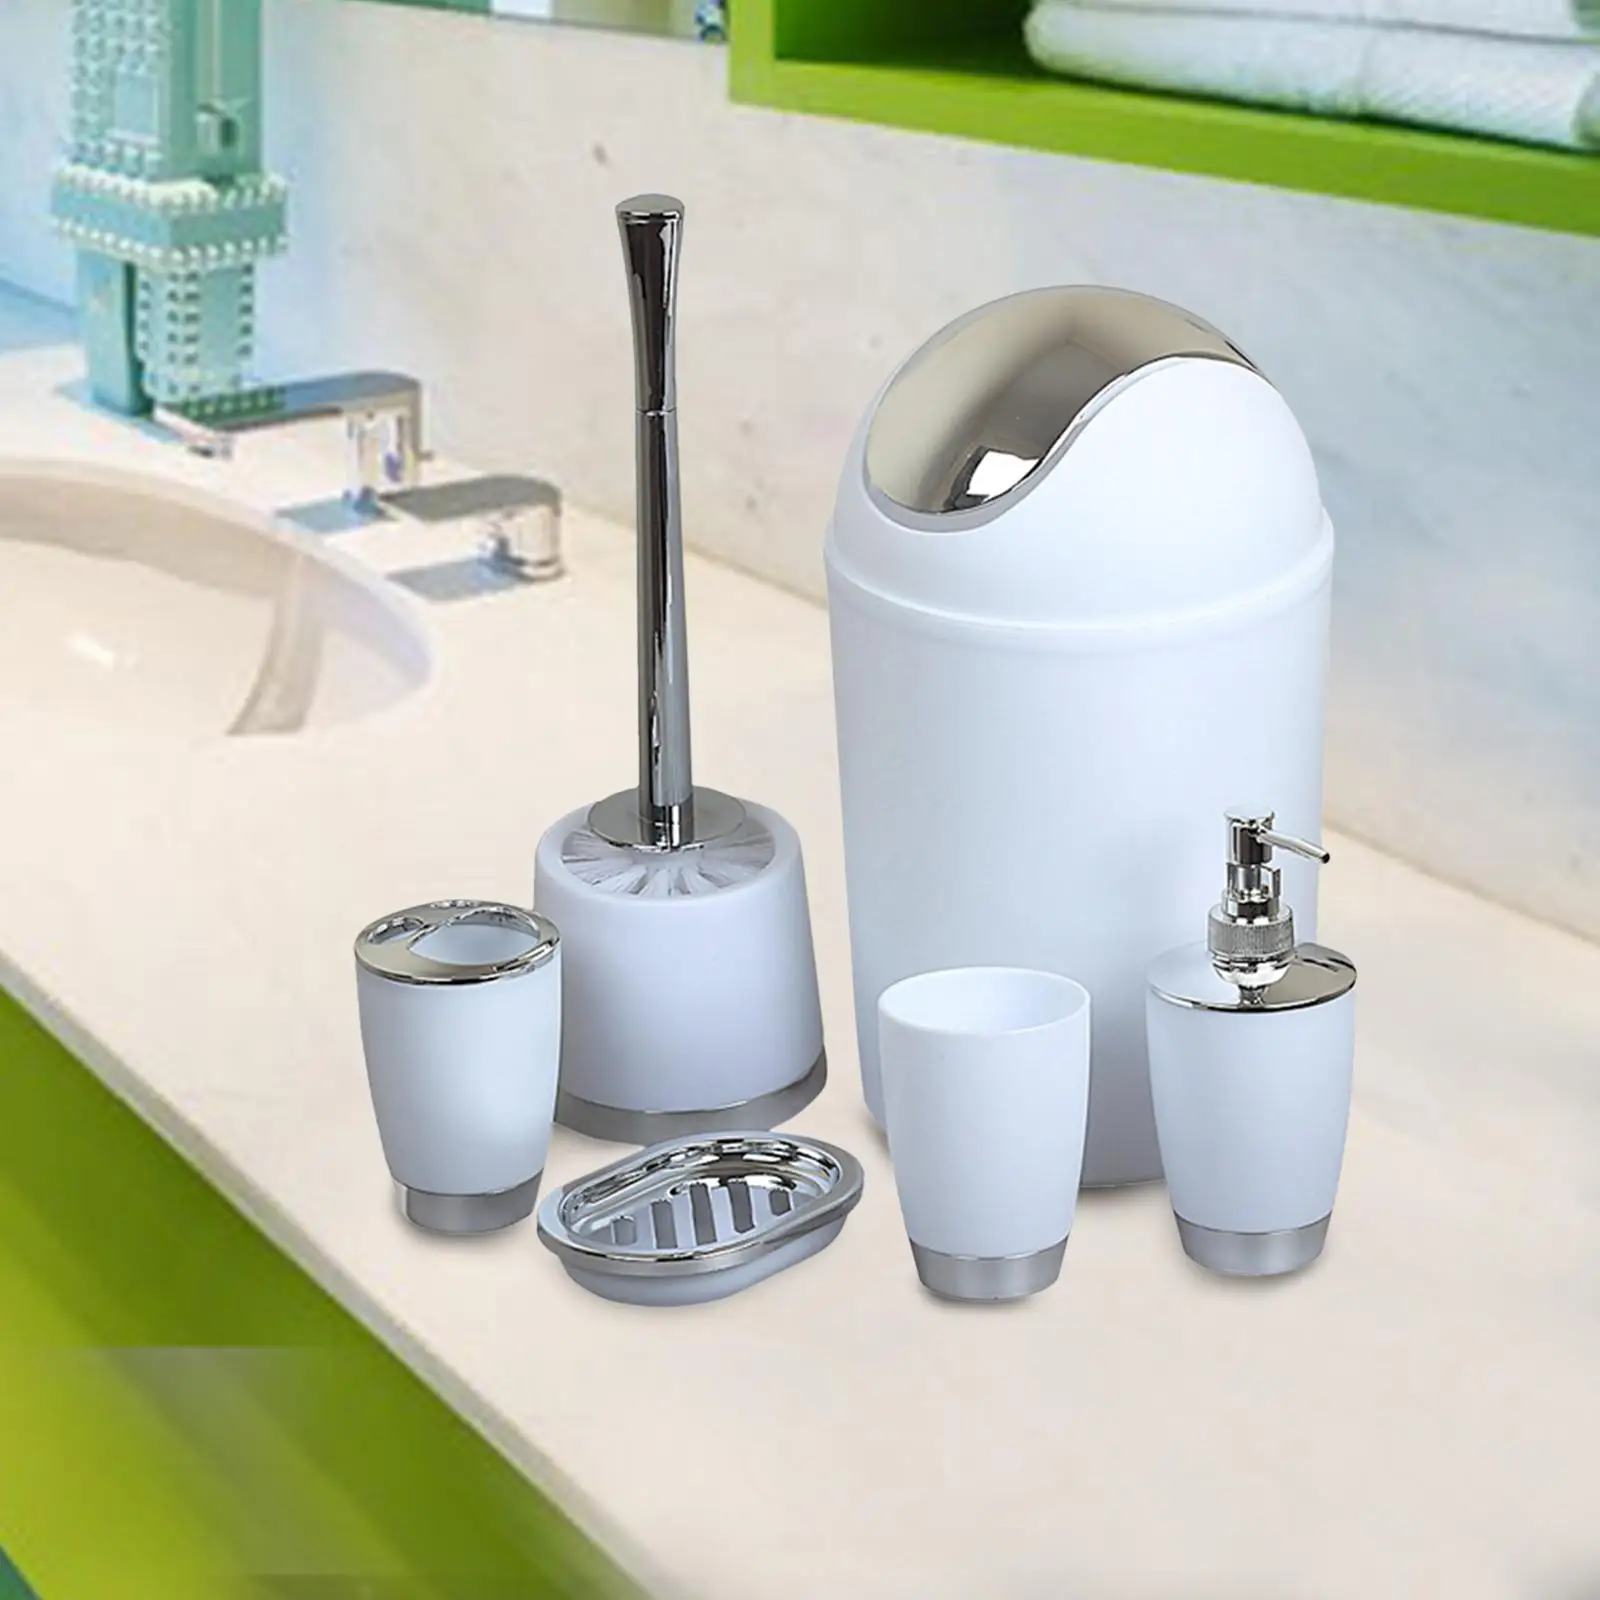 6 Pieces Apartment Bathroom Accessories Set Lotion Dispenser for Hotel Gifts